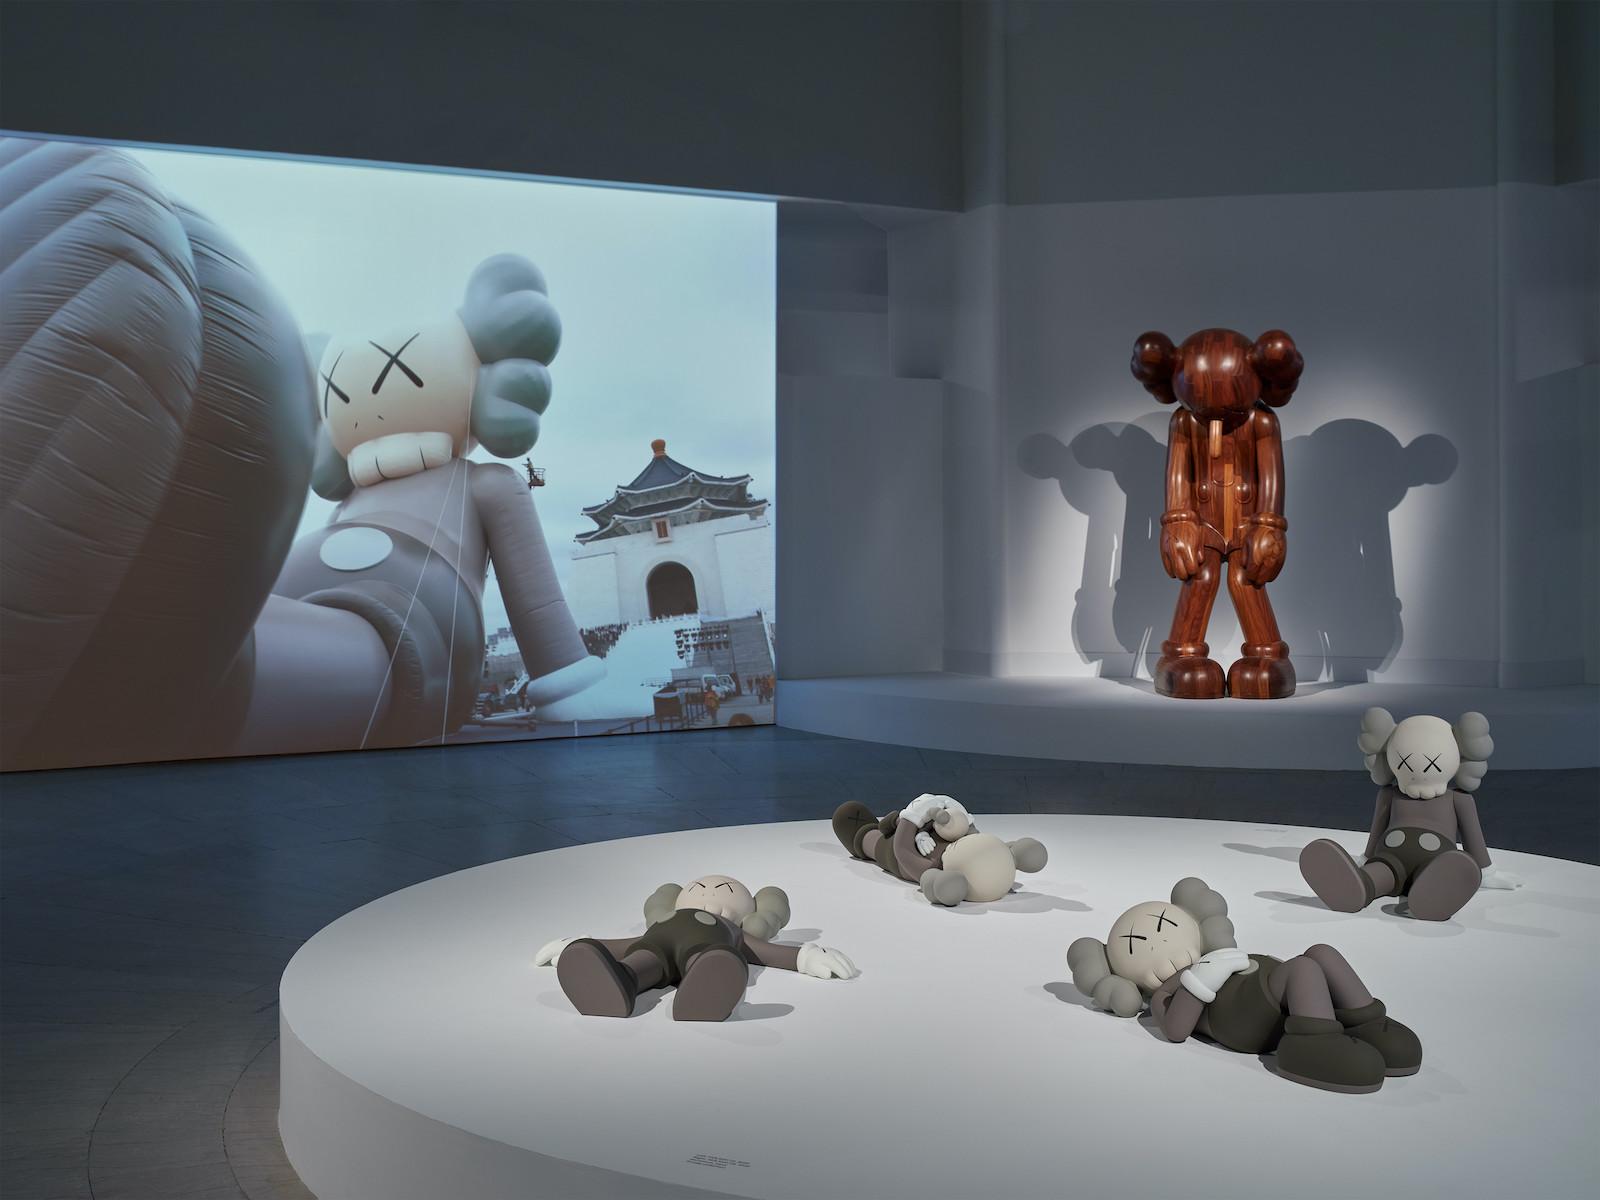 Installation view, KAWS: WHAT PARTY, Brooklyn Museum, February 26, 2021 - September 5, 2021. Courtesy Brooklyn Museum. Photo Michael Biondo.